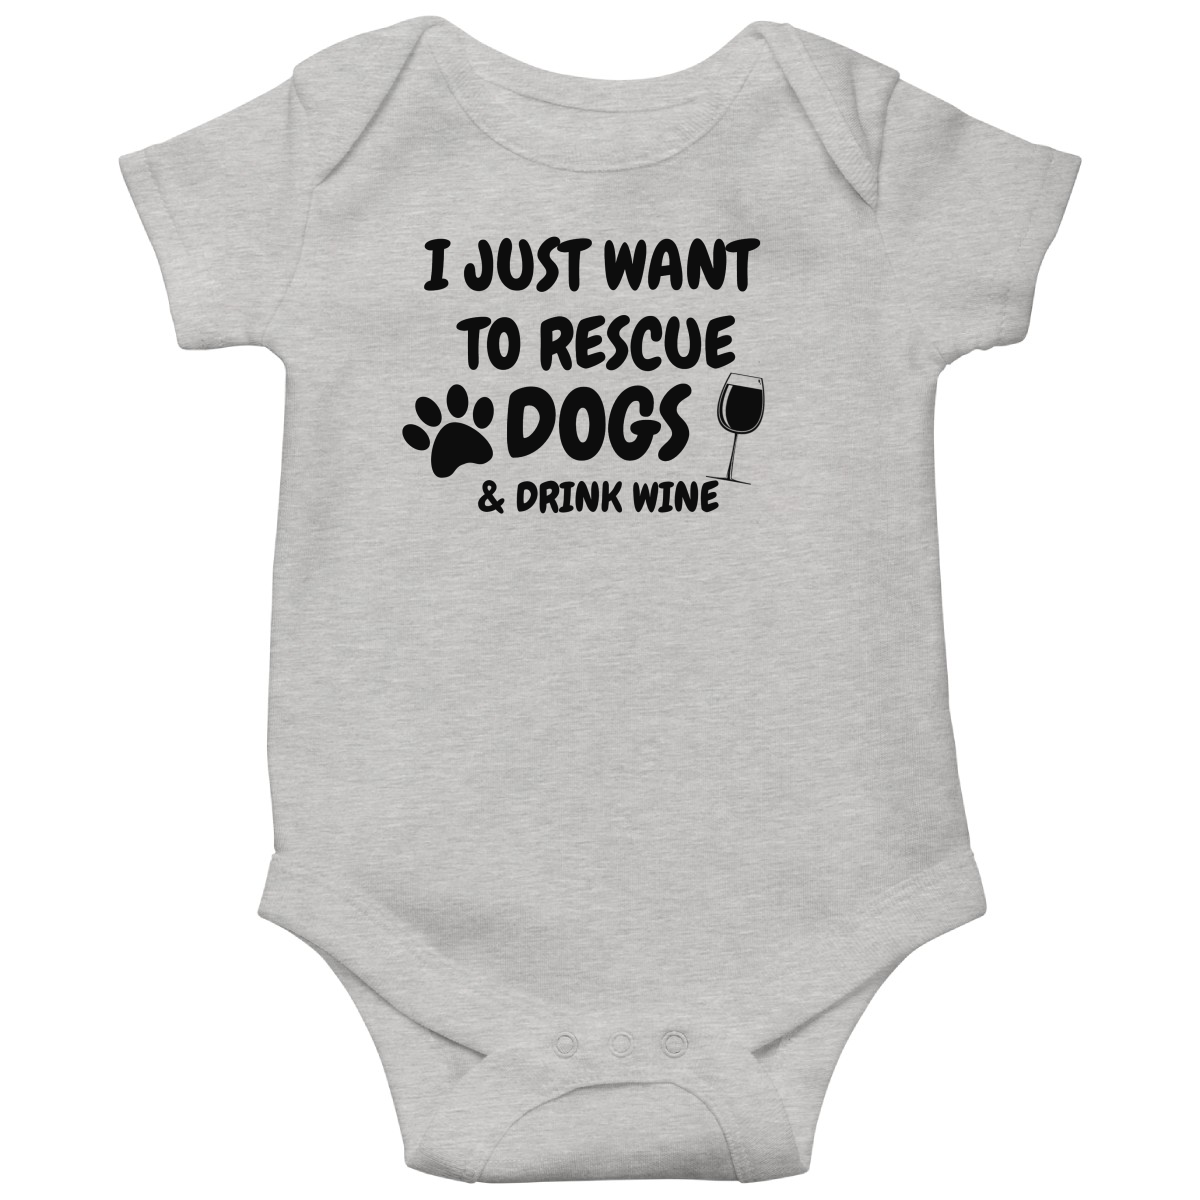 Dogs and Drink Wine Baby Bodysuits | Gray